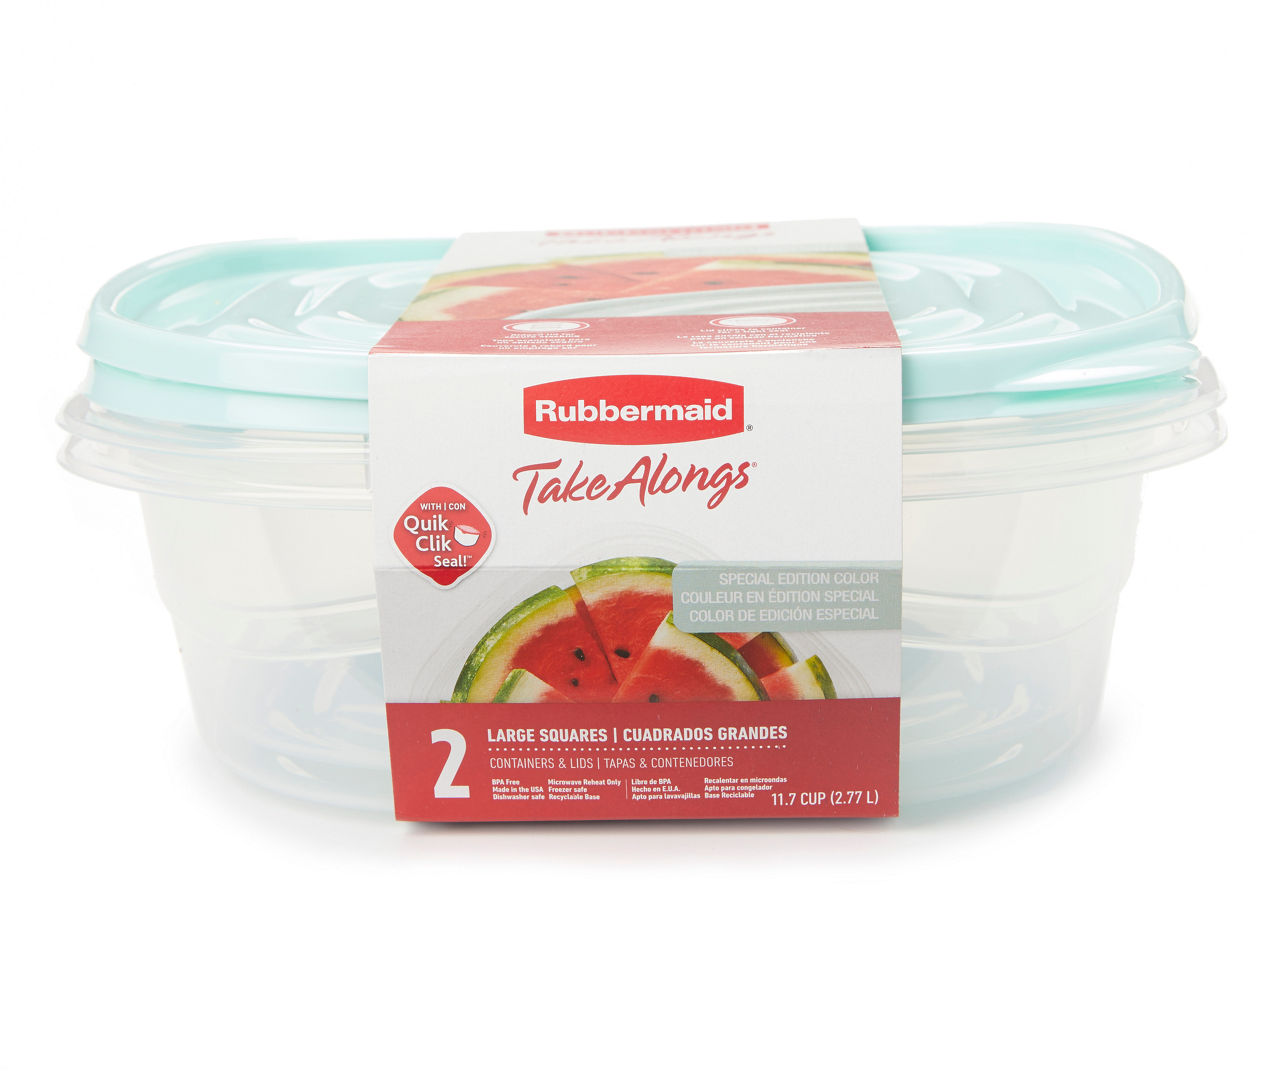 Rubbermaid Food Storage Egg Containers